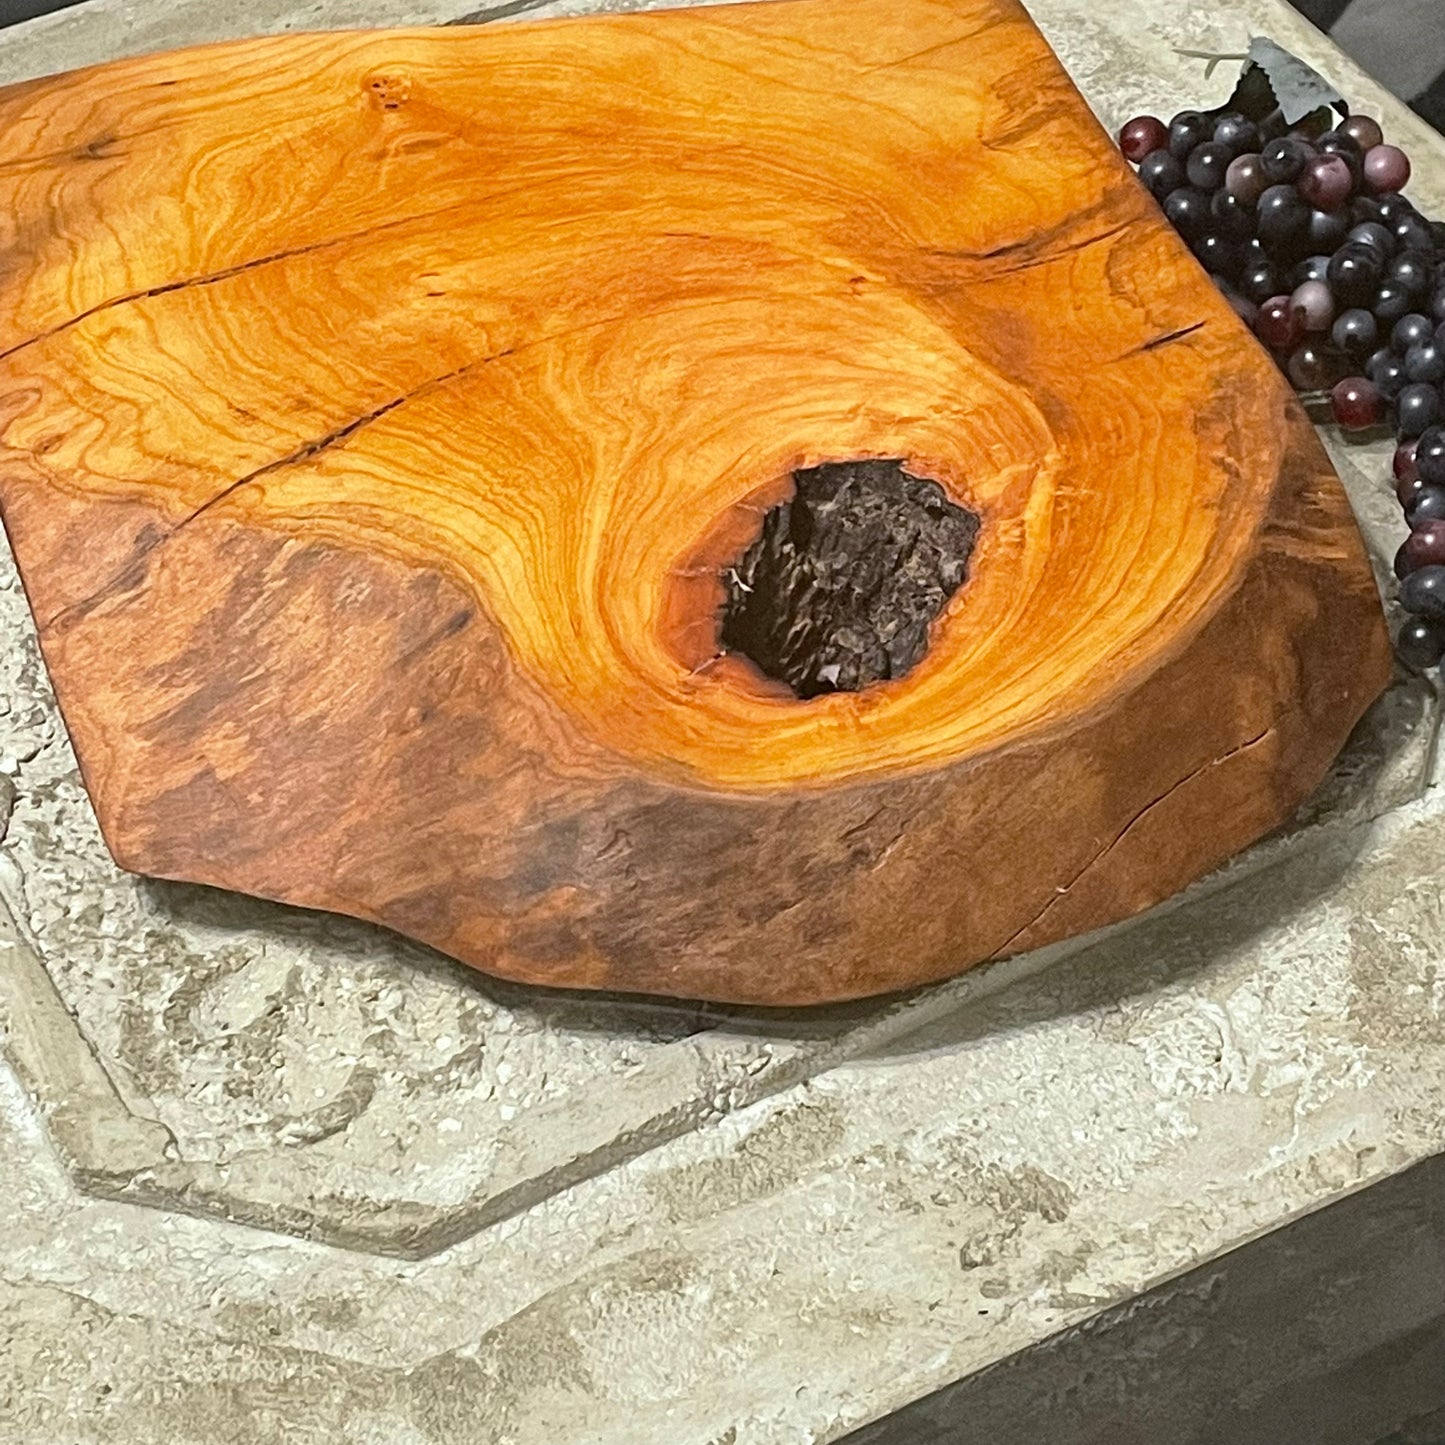 Hand Crafted Live Edge With Accent Hole Cherry Wood Charcuterie Snacking Cheese Board Large Entertaining Holiday Gift